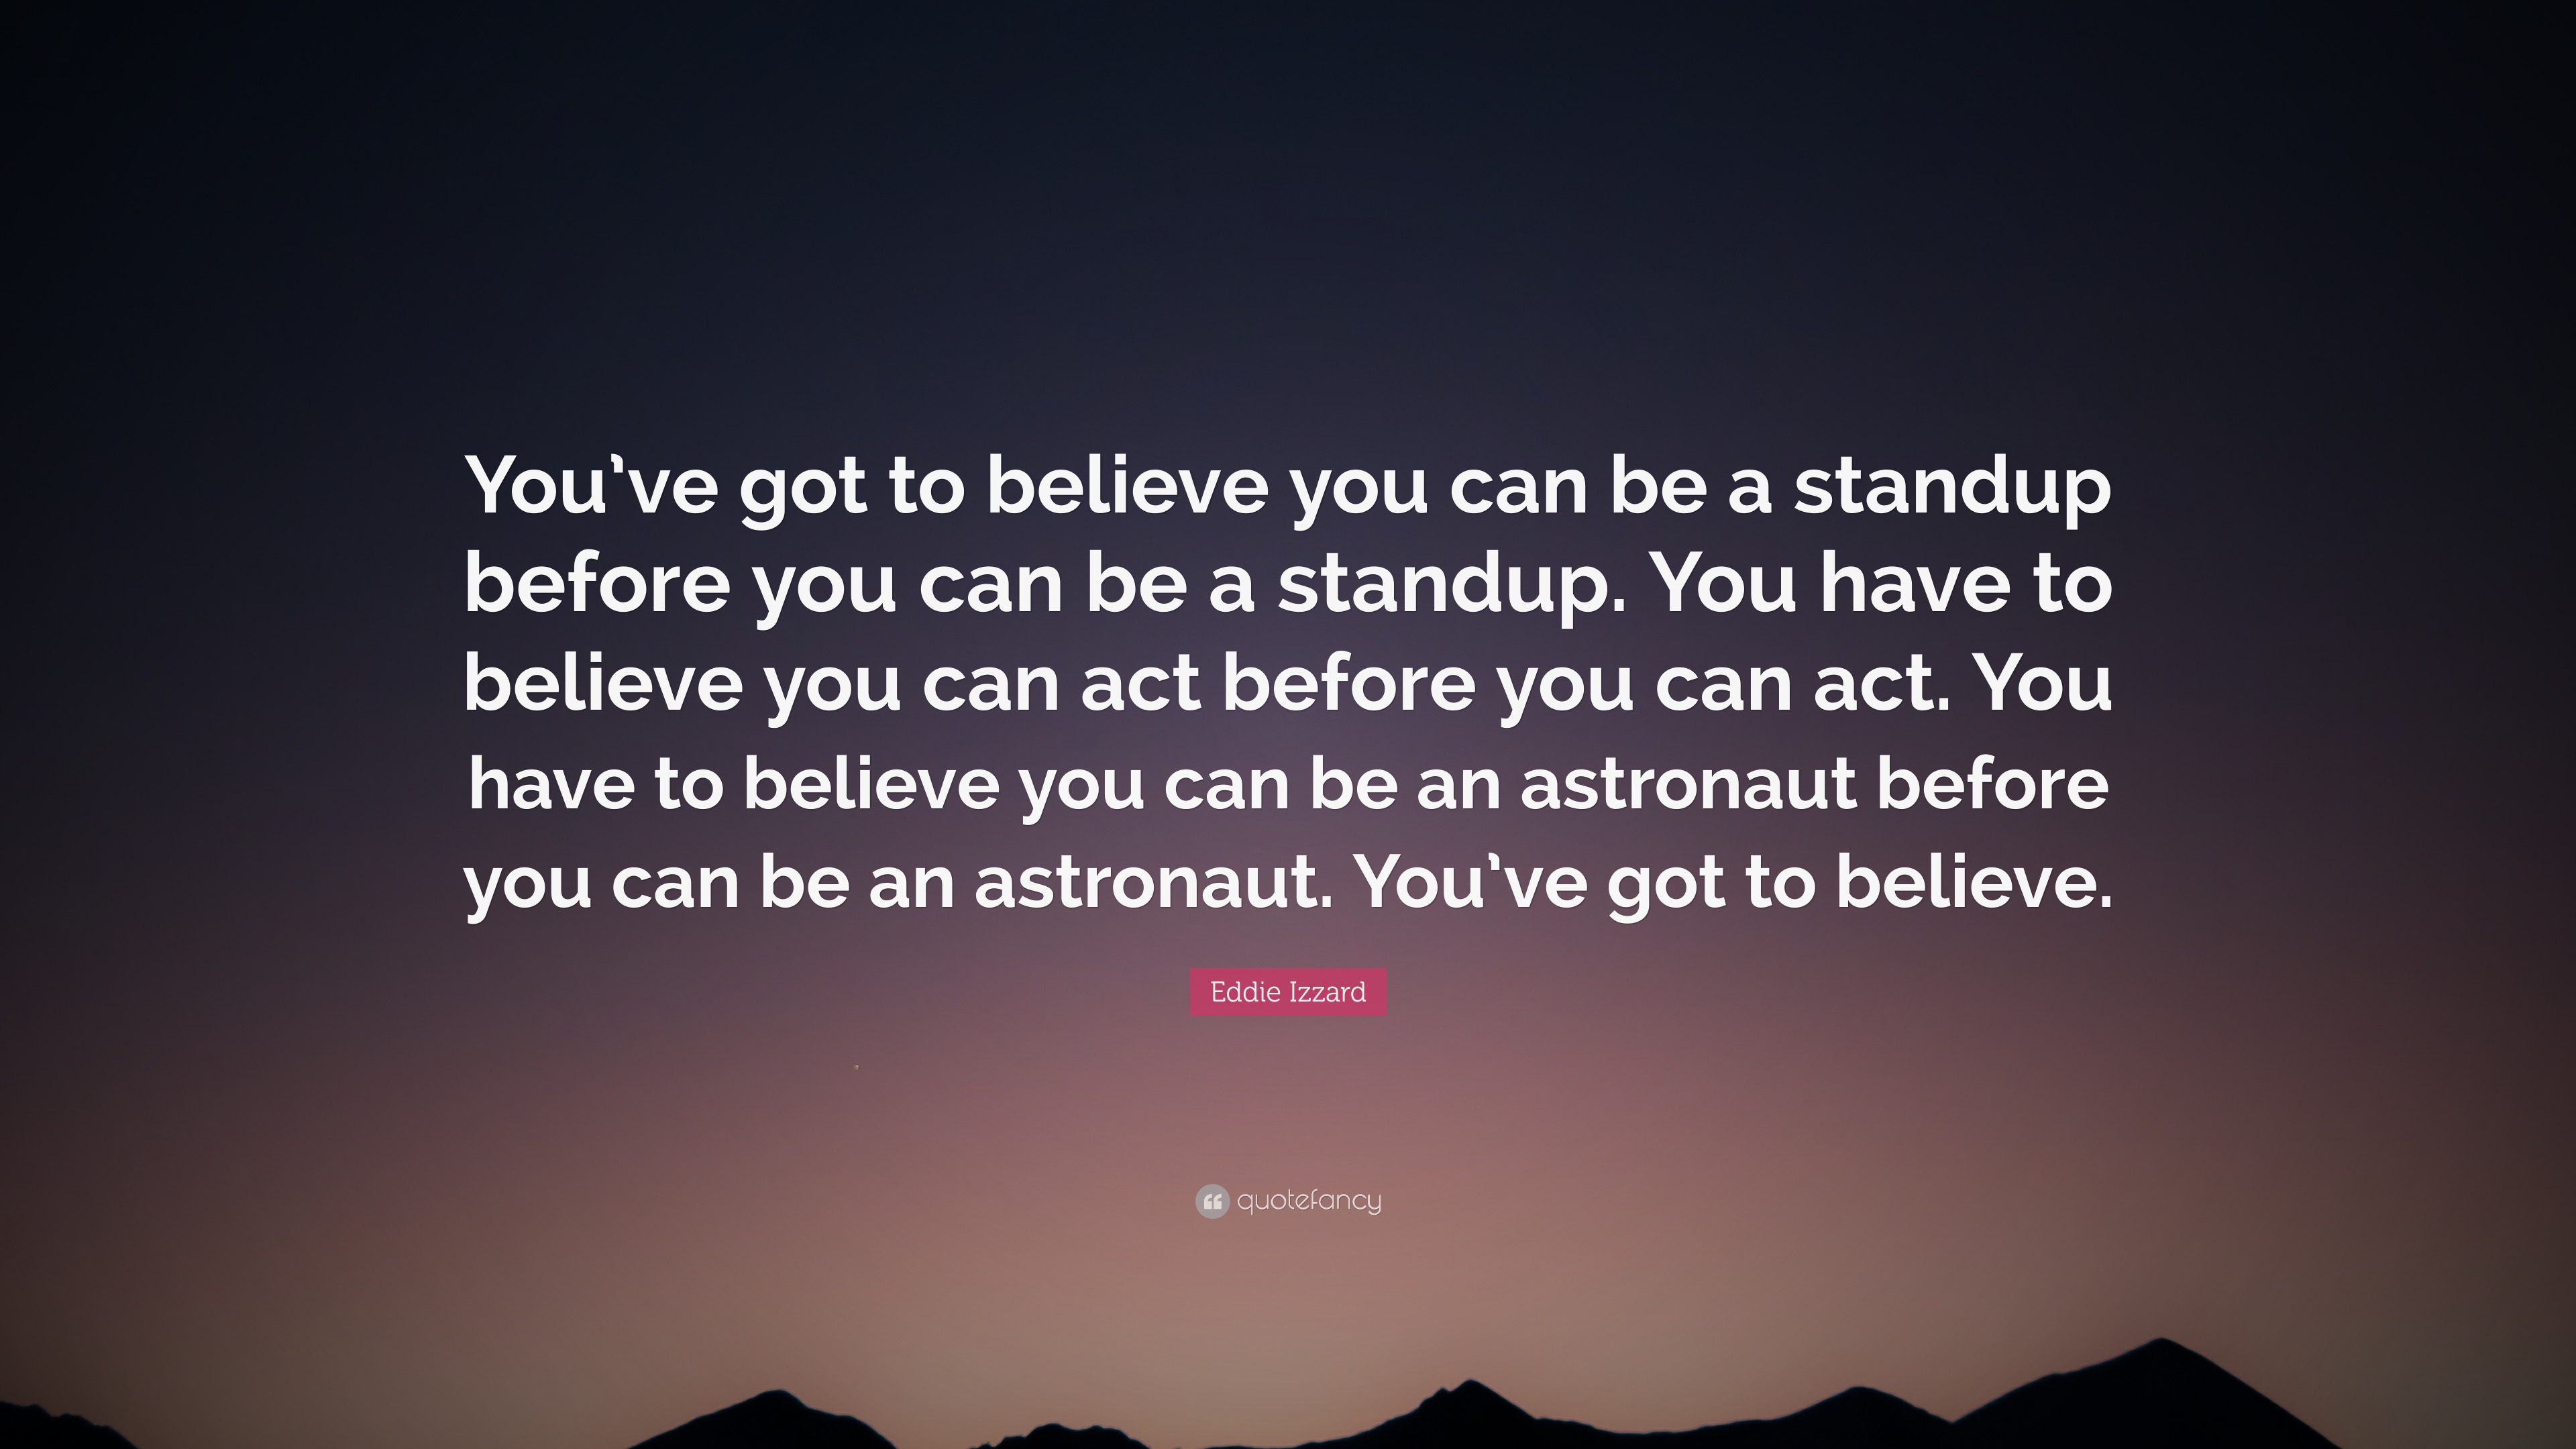 Eddie Izzard Quote: “You’ve got to believe you can be a standup before ...